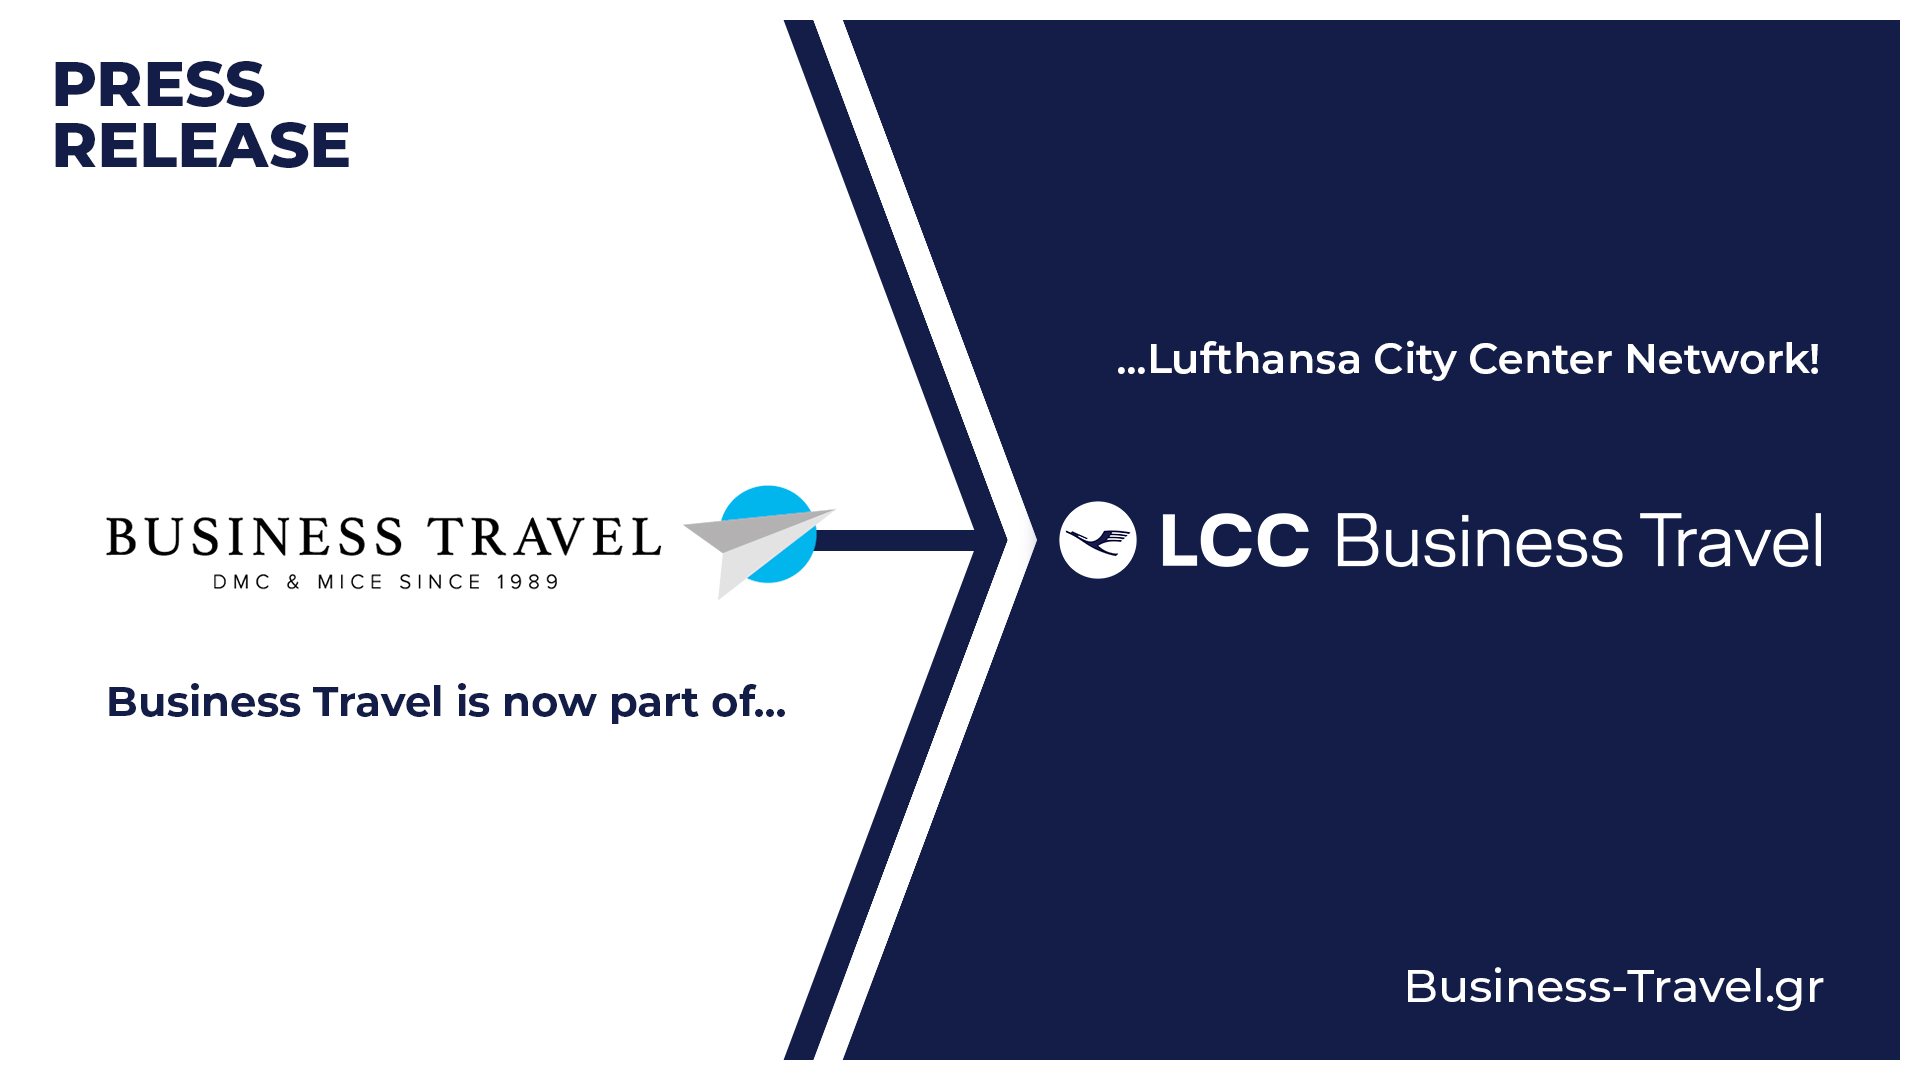 LCC BUSINESS TRAVEL PRESS RELEASE